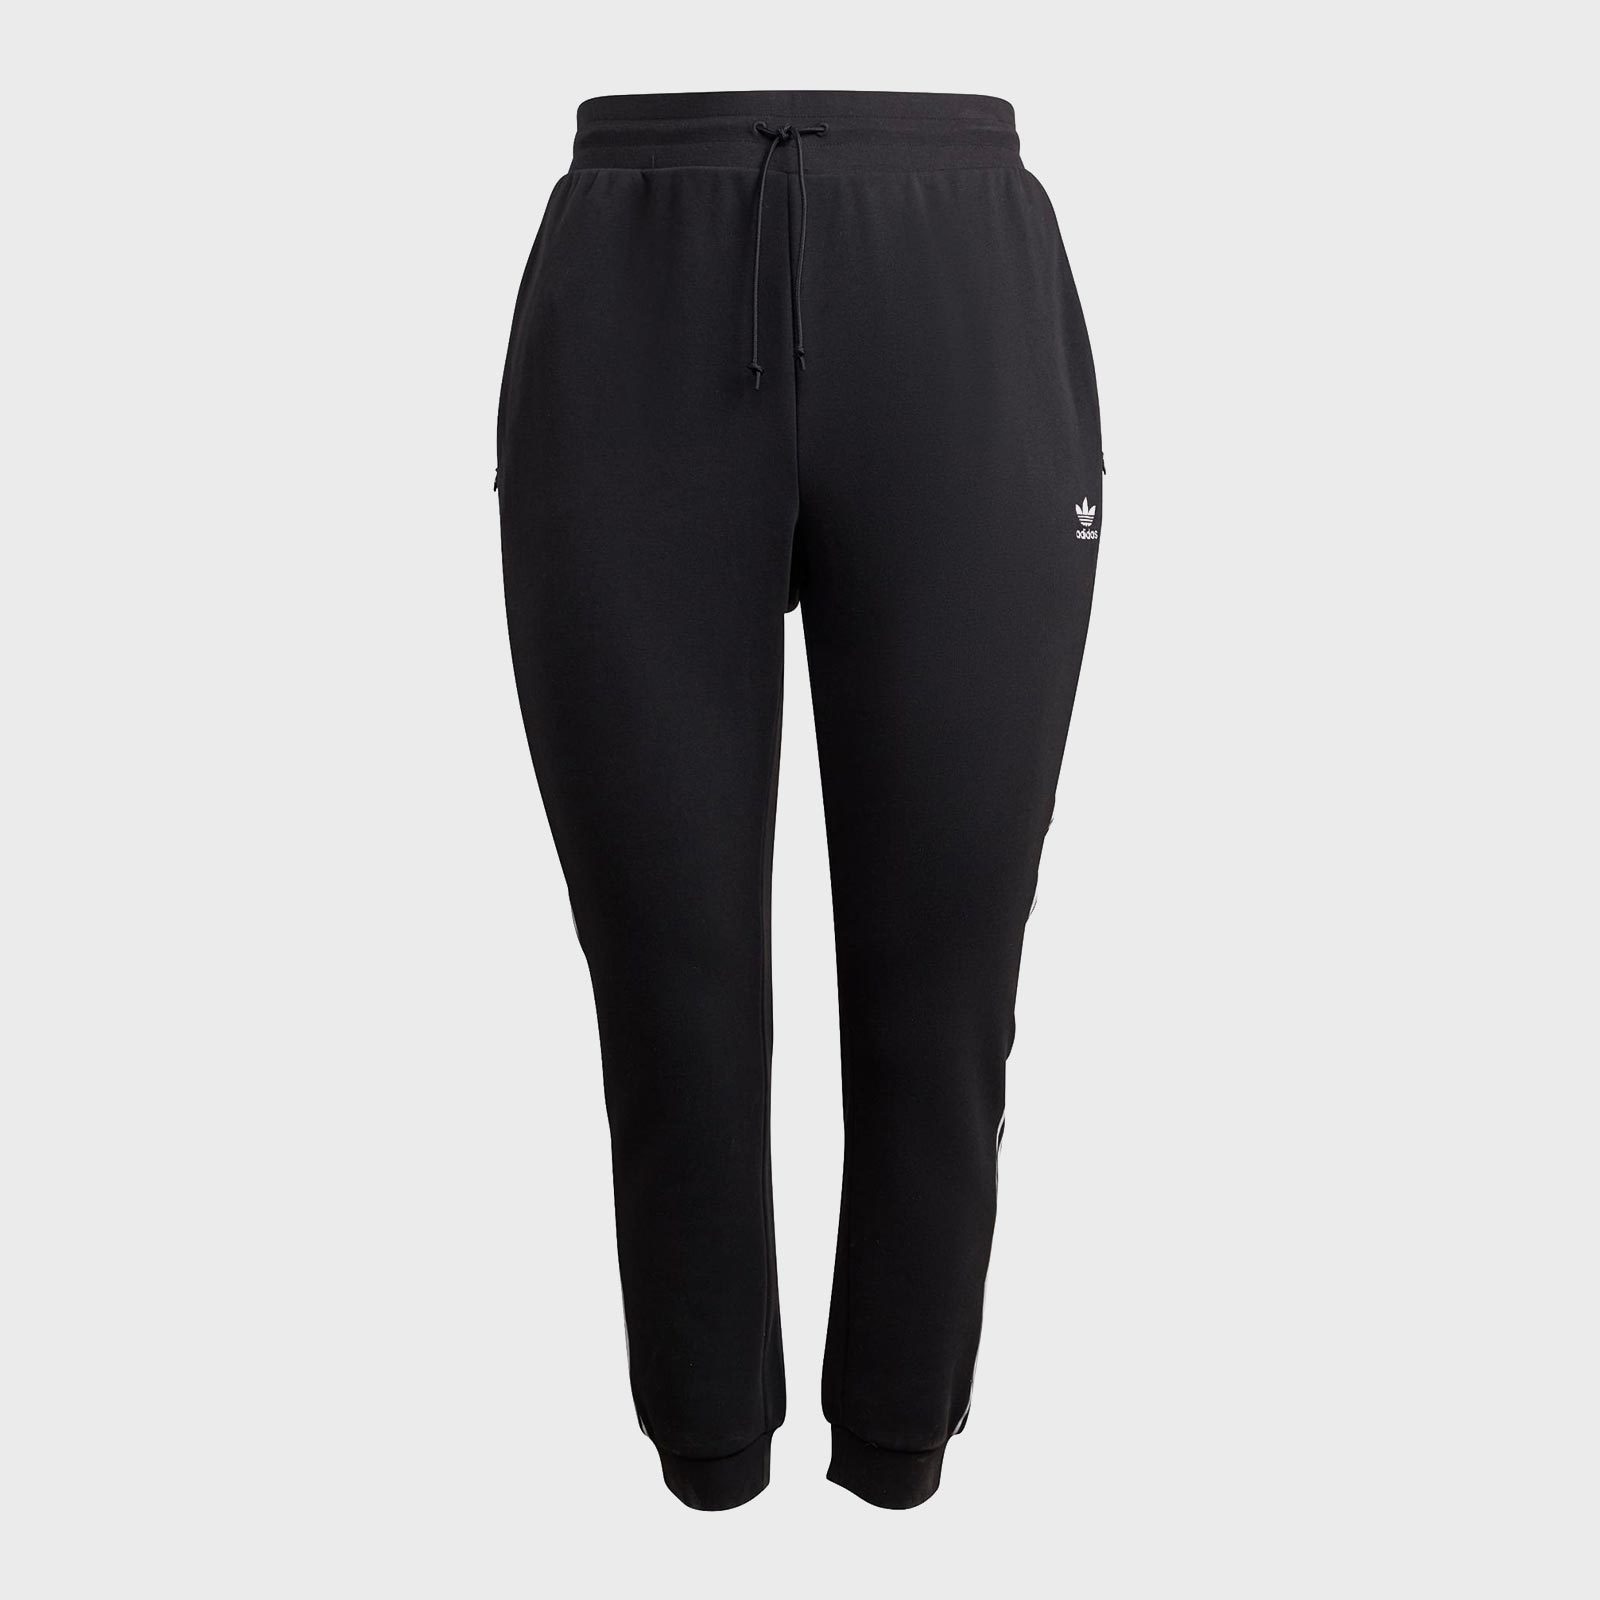 FULLSOFT Sweatpants for Women-Womens Joggers with Pockets Lounge Pants for  Yoga Workout Running Black Medium